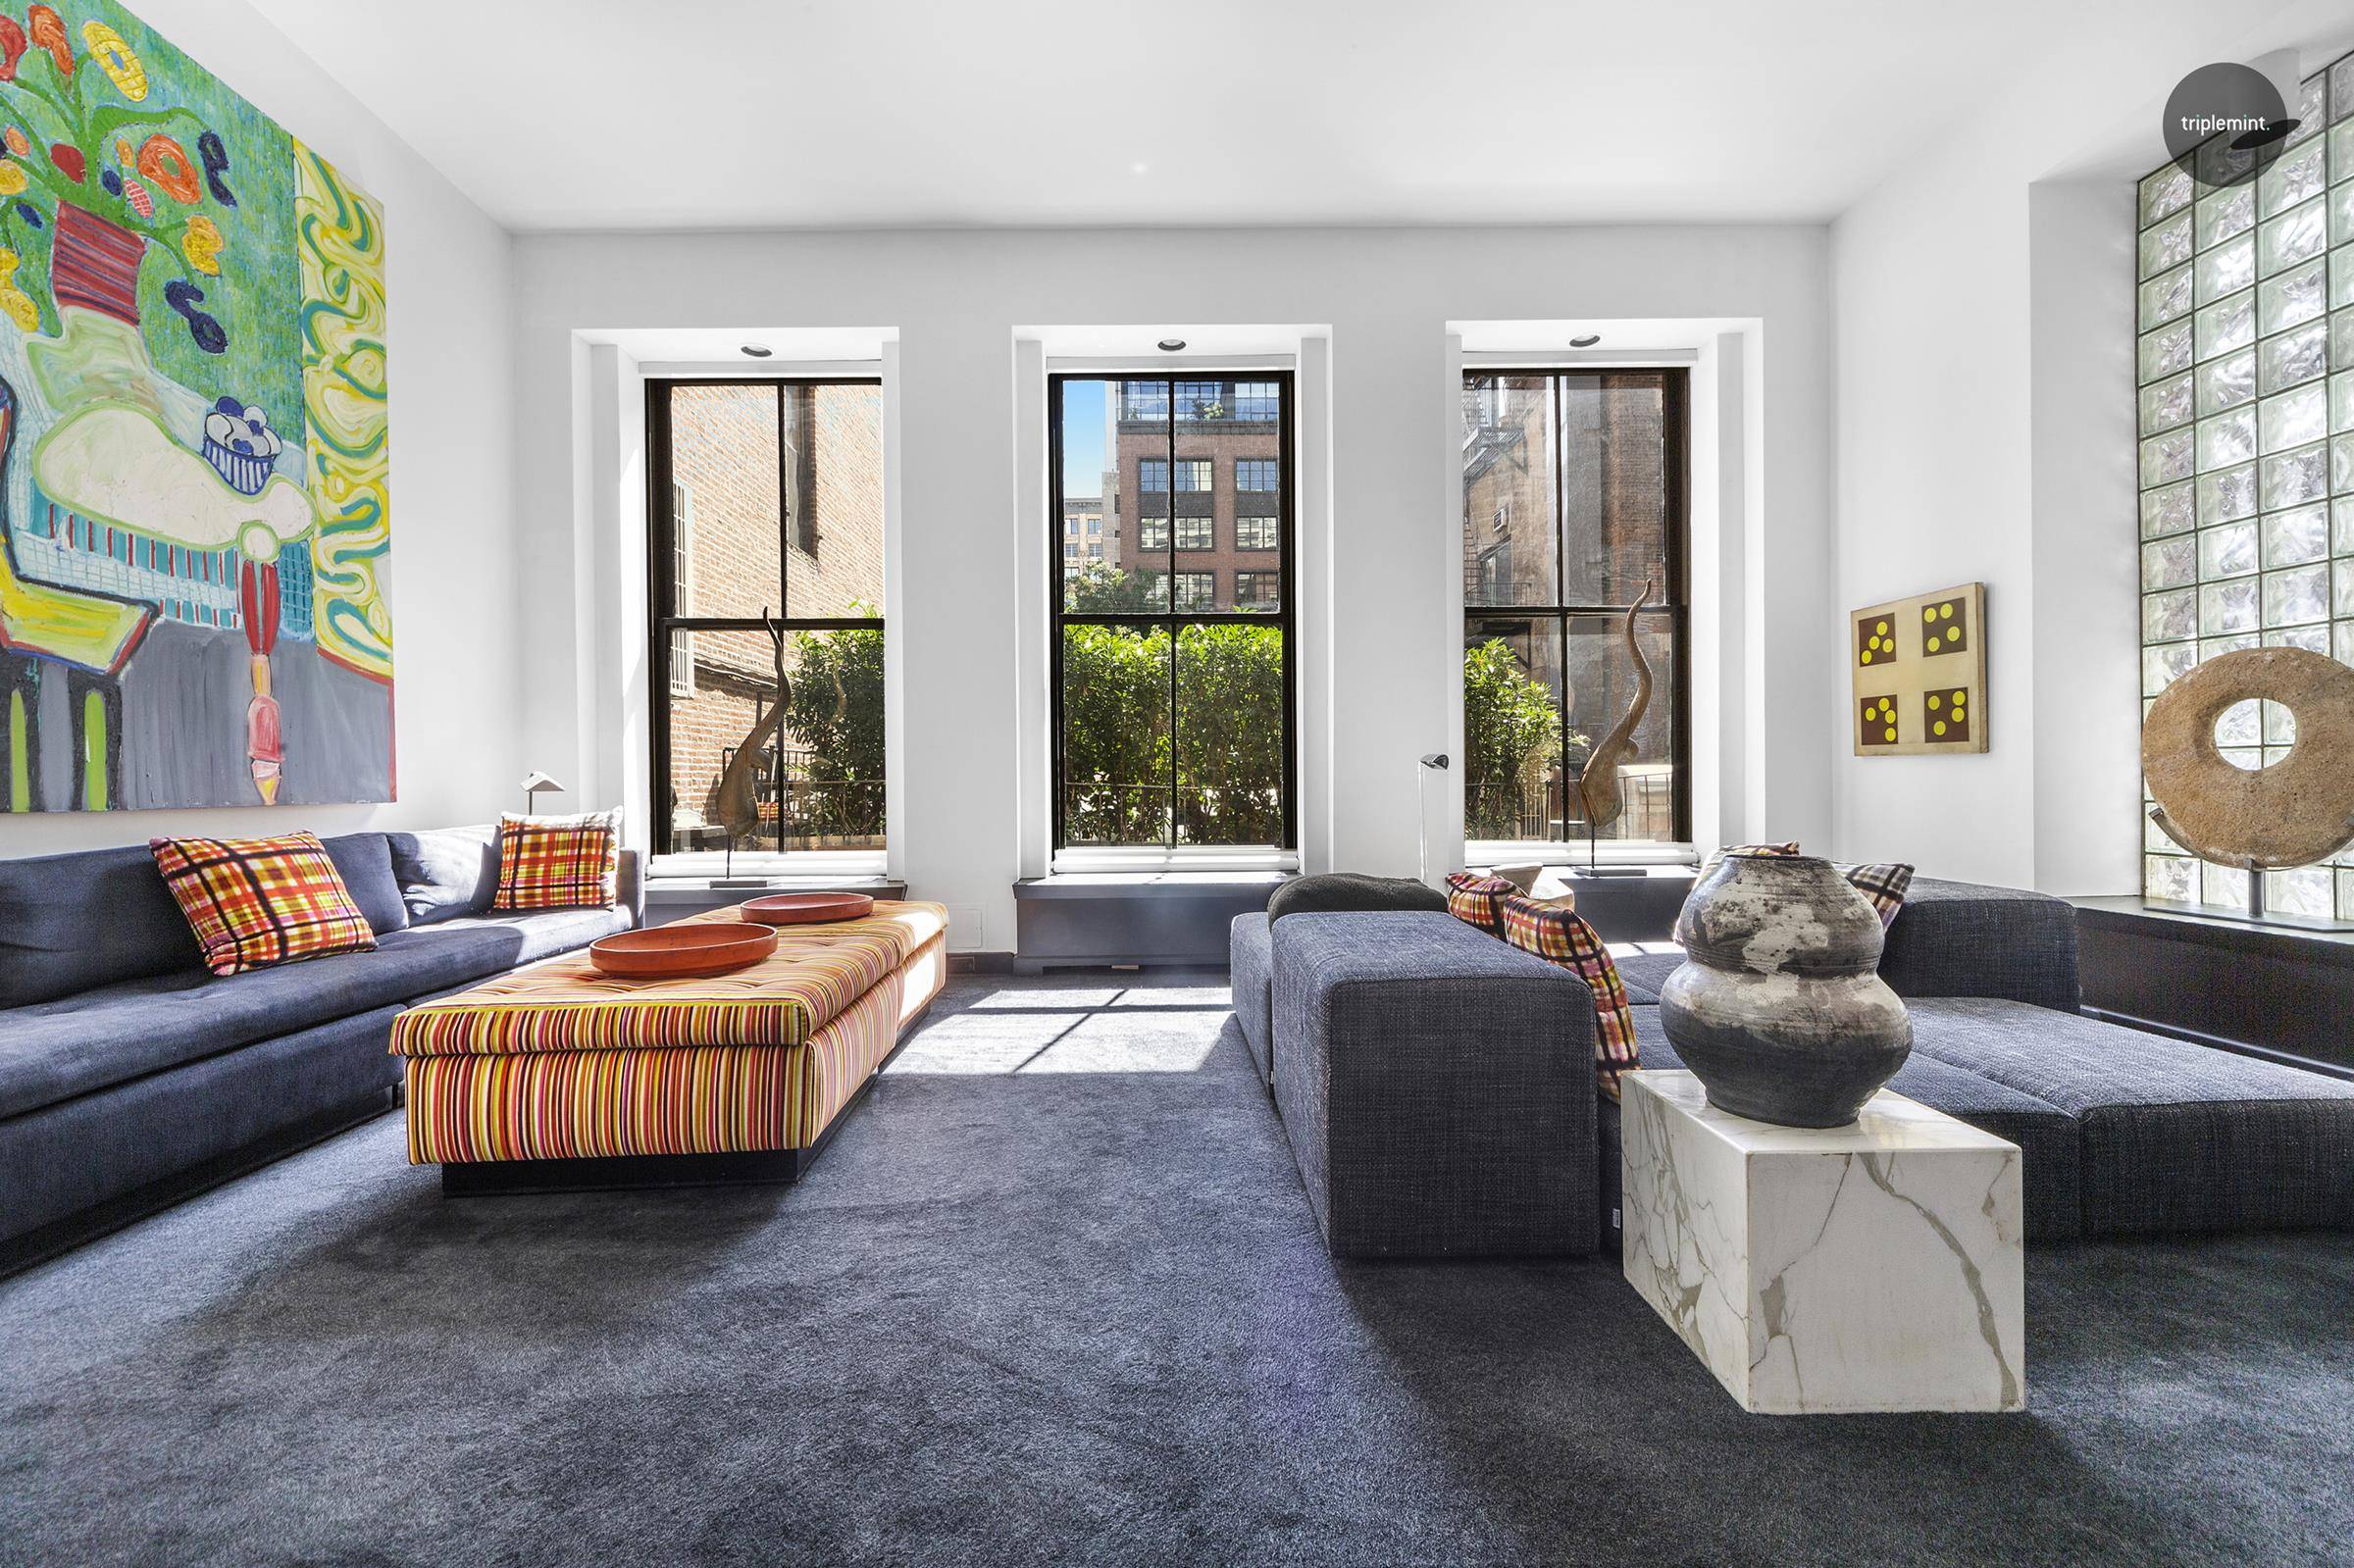 Welcome to Apartment 2A at 12 East 14th Street, a stunning 1, 200 square foot duplex loft in one of Greenwich Village s premier boutique luxury buildings.